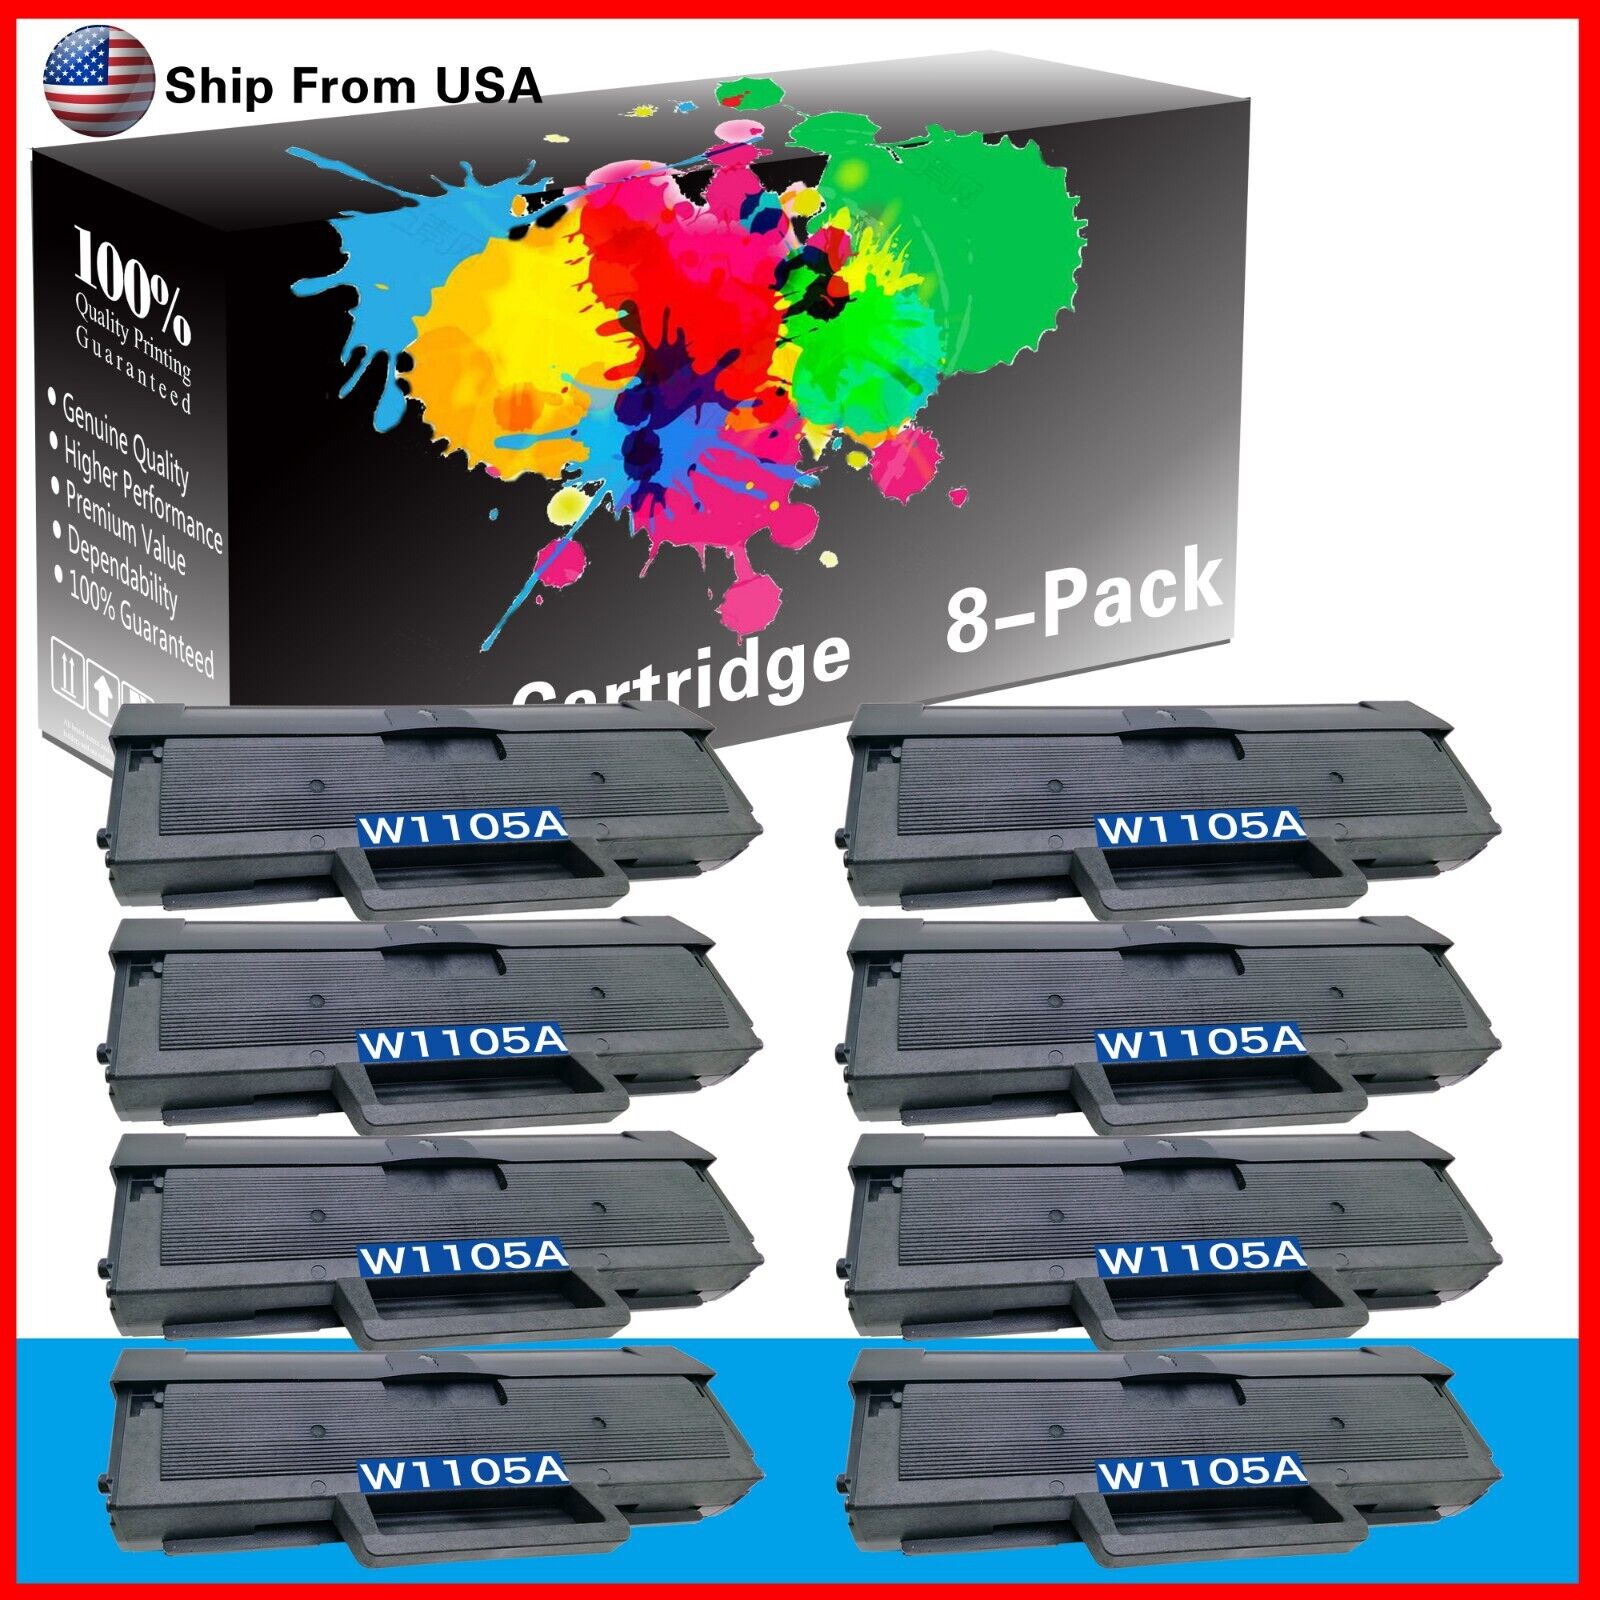 8-Pack 1105A W1105A Toner Cartridge Fit For Laser MFP 135a 107a Printer